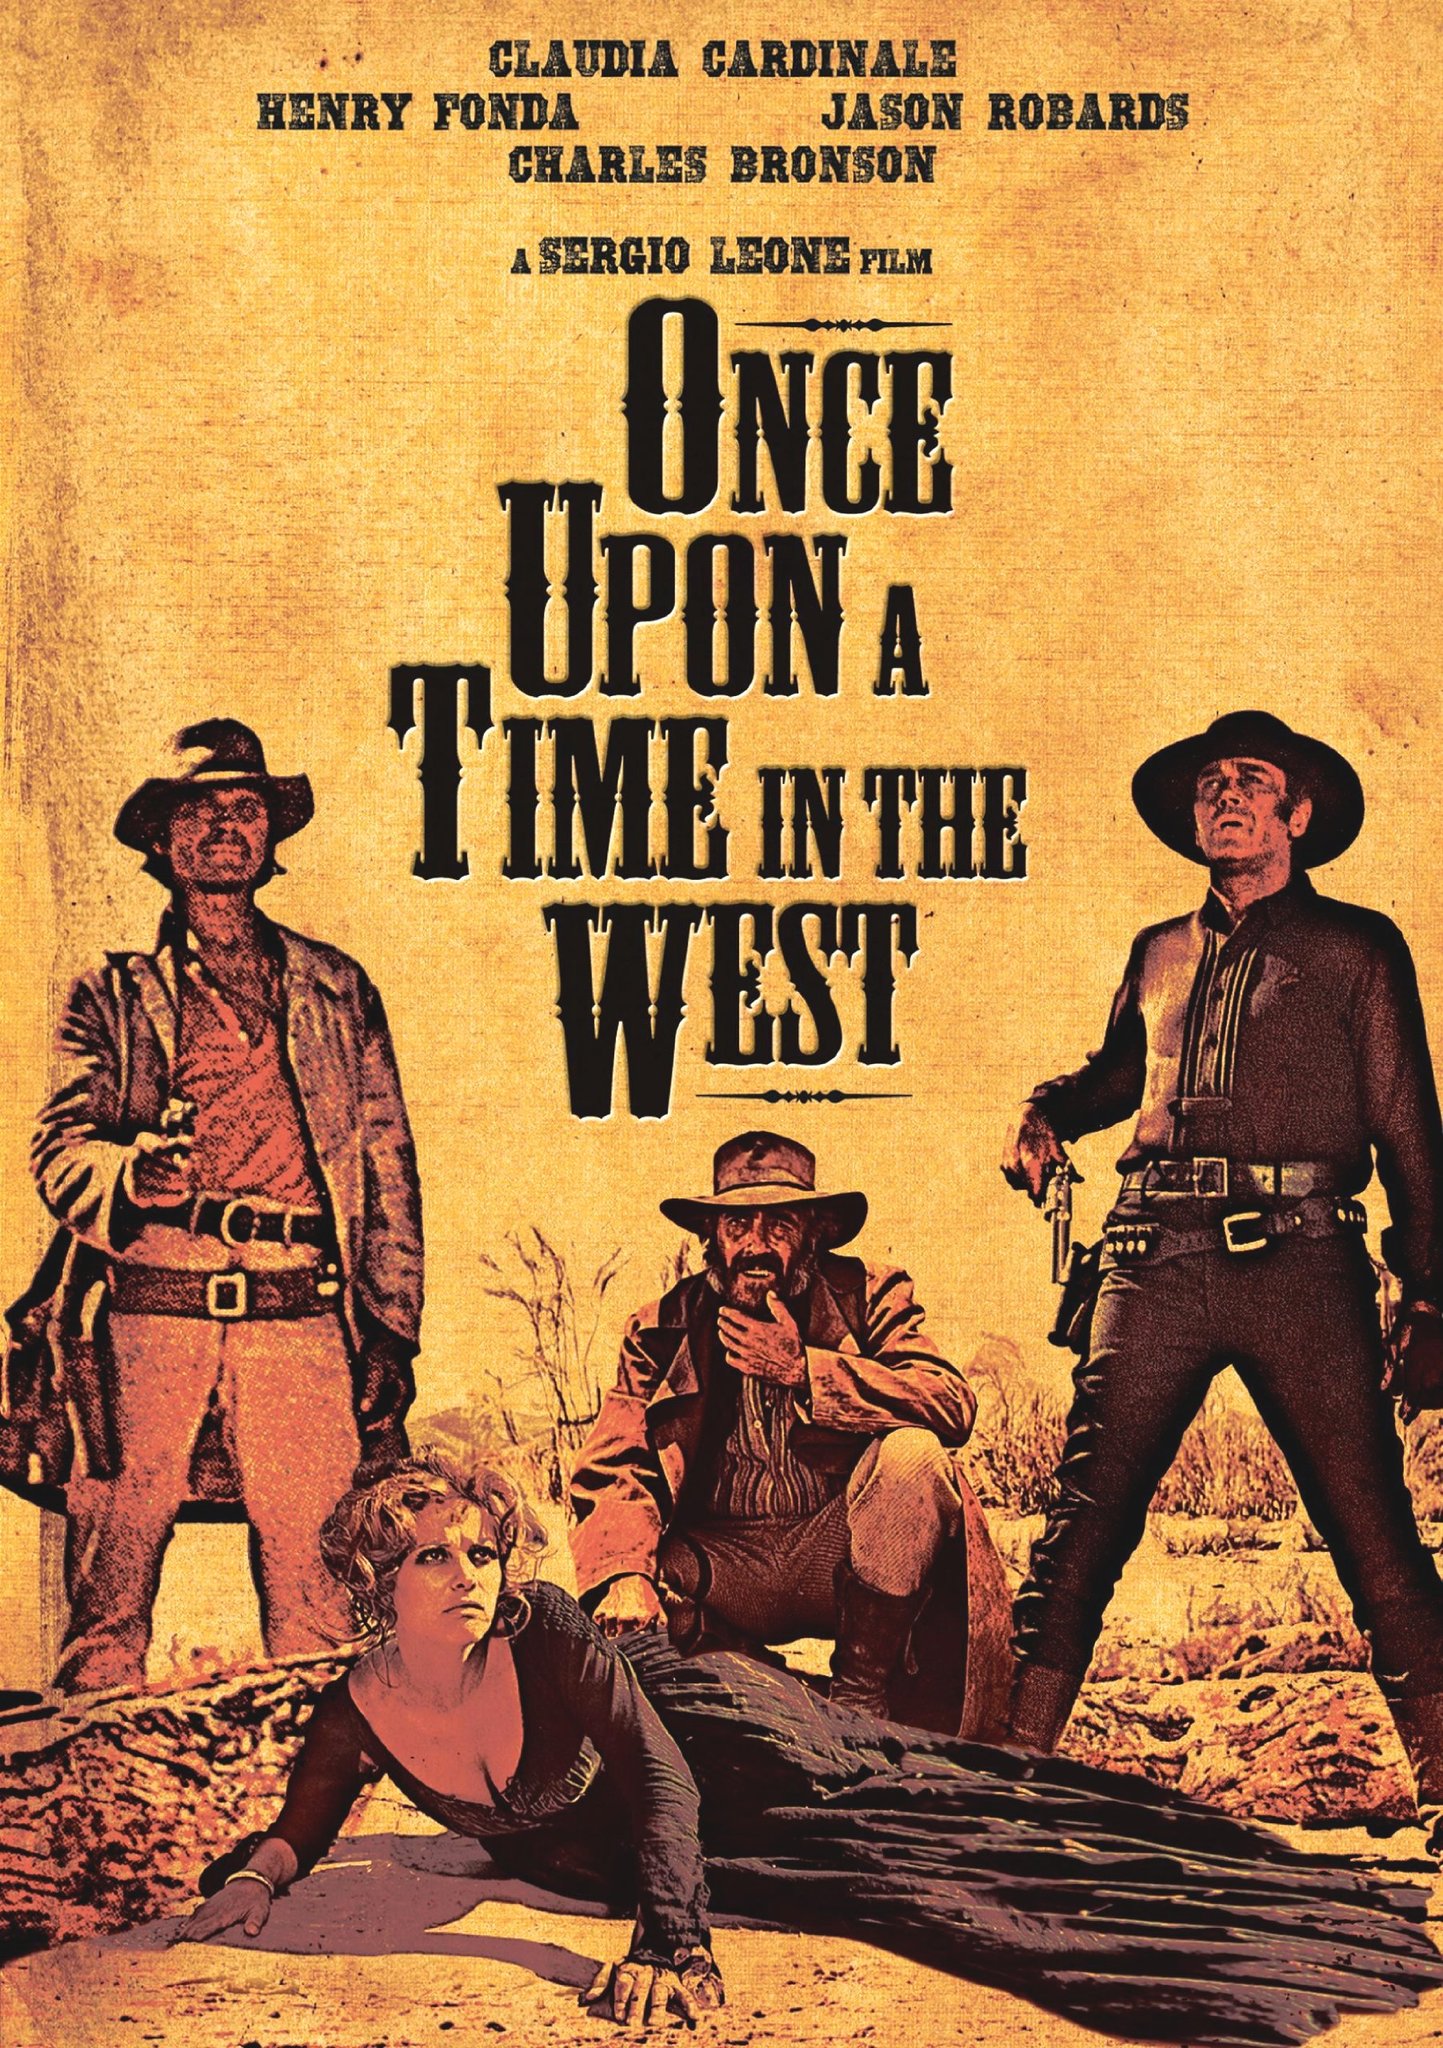 Movie poster for Once Upon a Time in the West